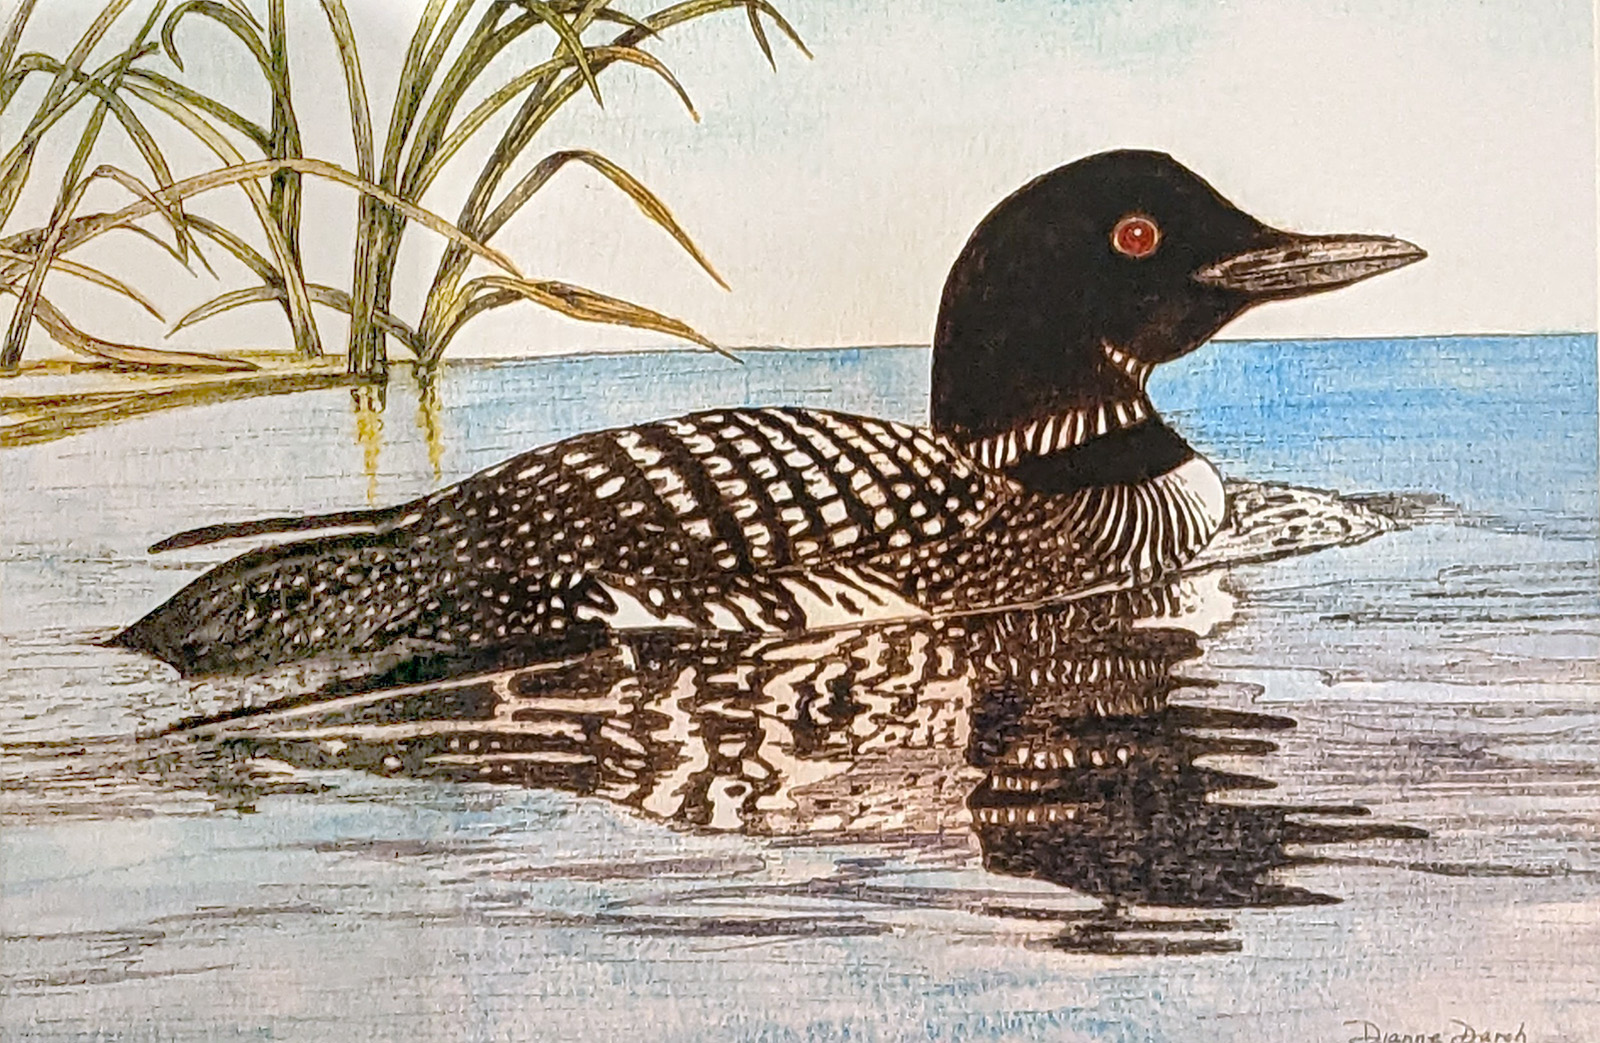 Pen and Ink with Diane Darch - Loon - on Zoom